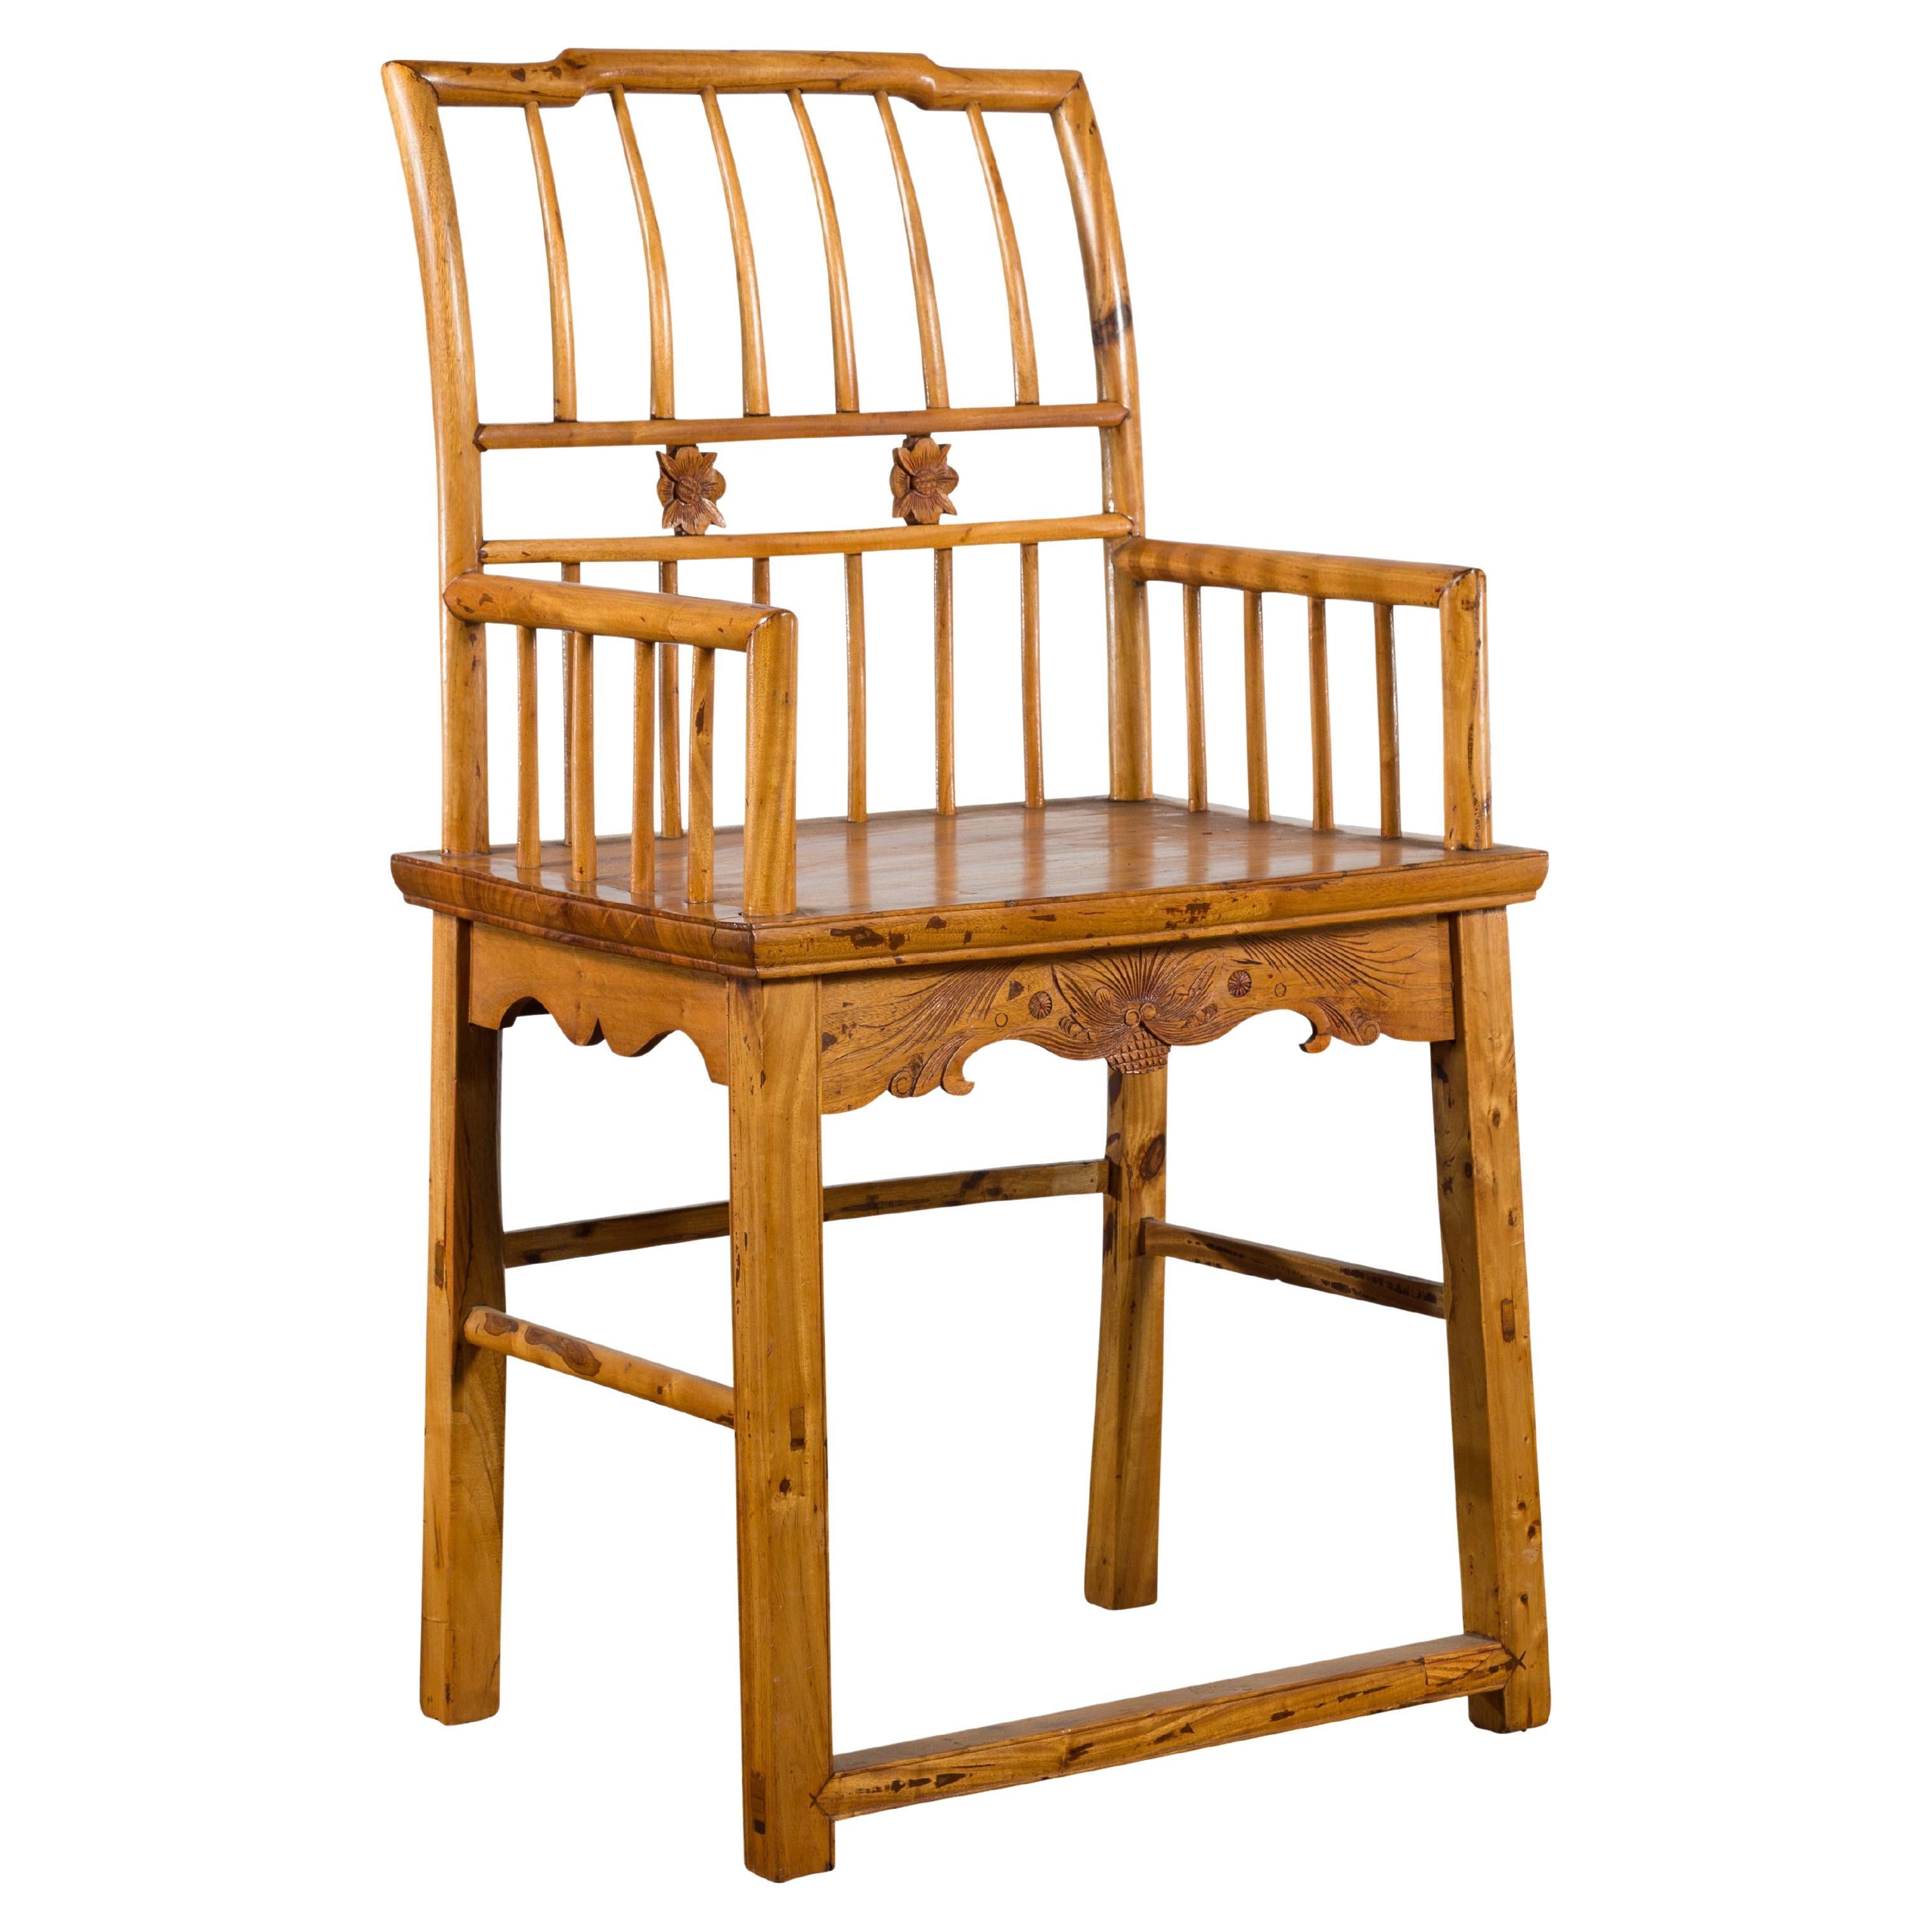 Chinese Qing Dynasty Period 19th Century Elmwood Armchair with Hand-Carved Apron For Sale